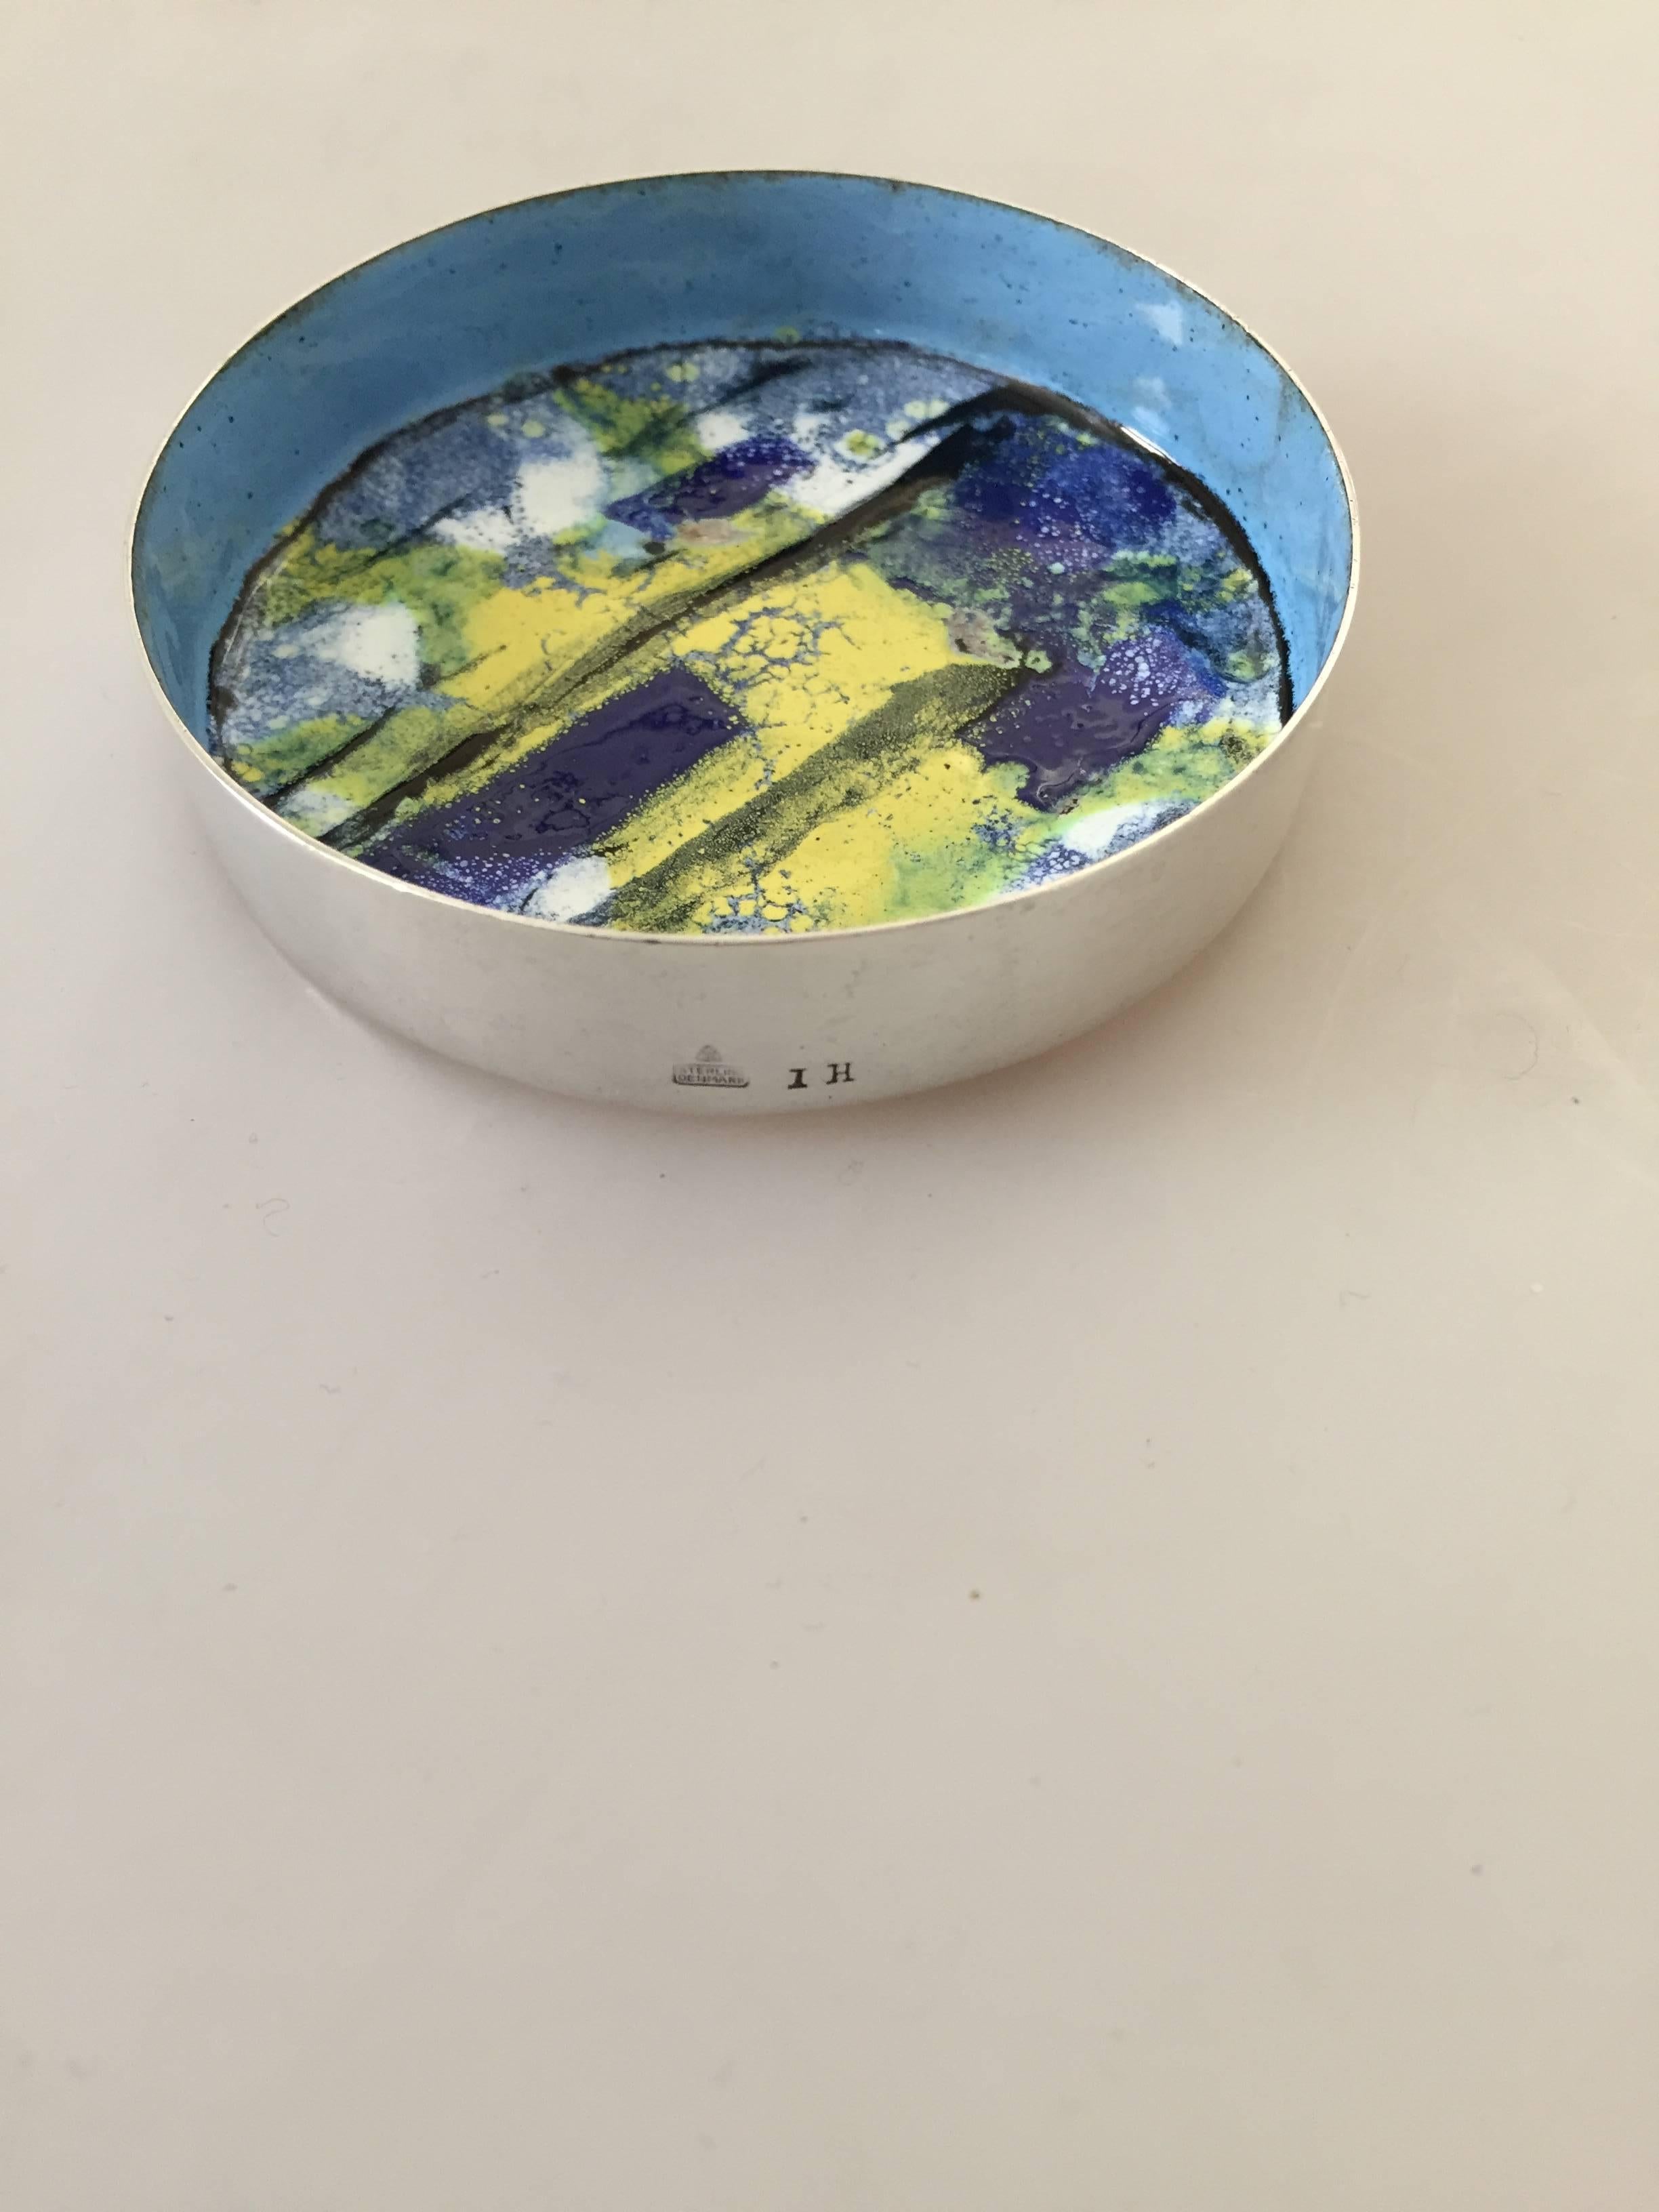 Anton Michelsen sterling silver enamel bowl by Inger Hanmann. Is in good condition.

Measures: 7.3 cm x 1.5 cm. 

Inger Hanmann (1918-2007) was a Danish painter and enamel artist. One of the first artists in Denmark to champion enamel. She did